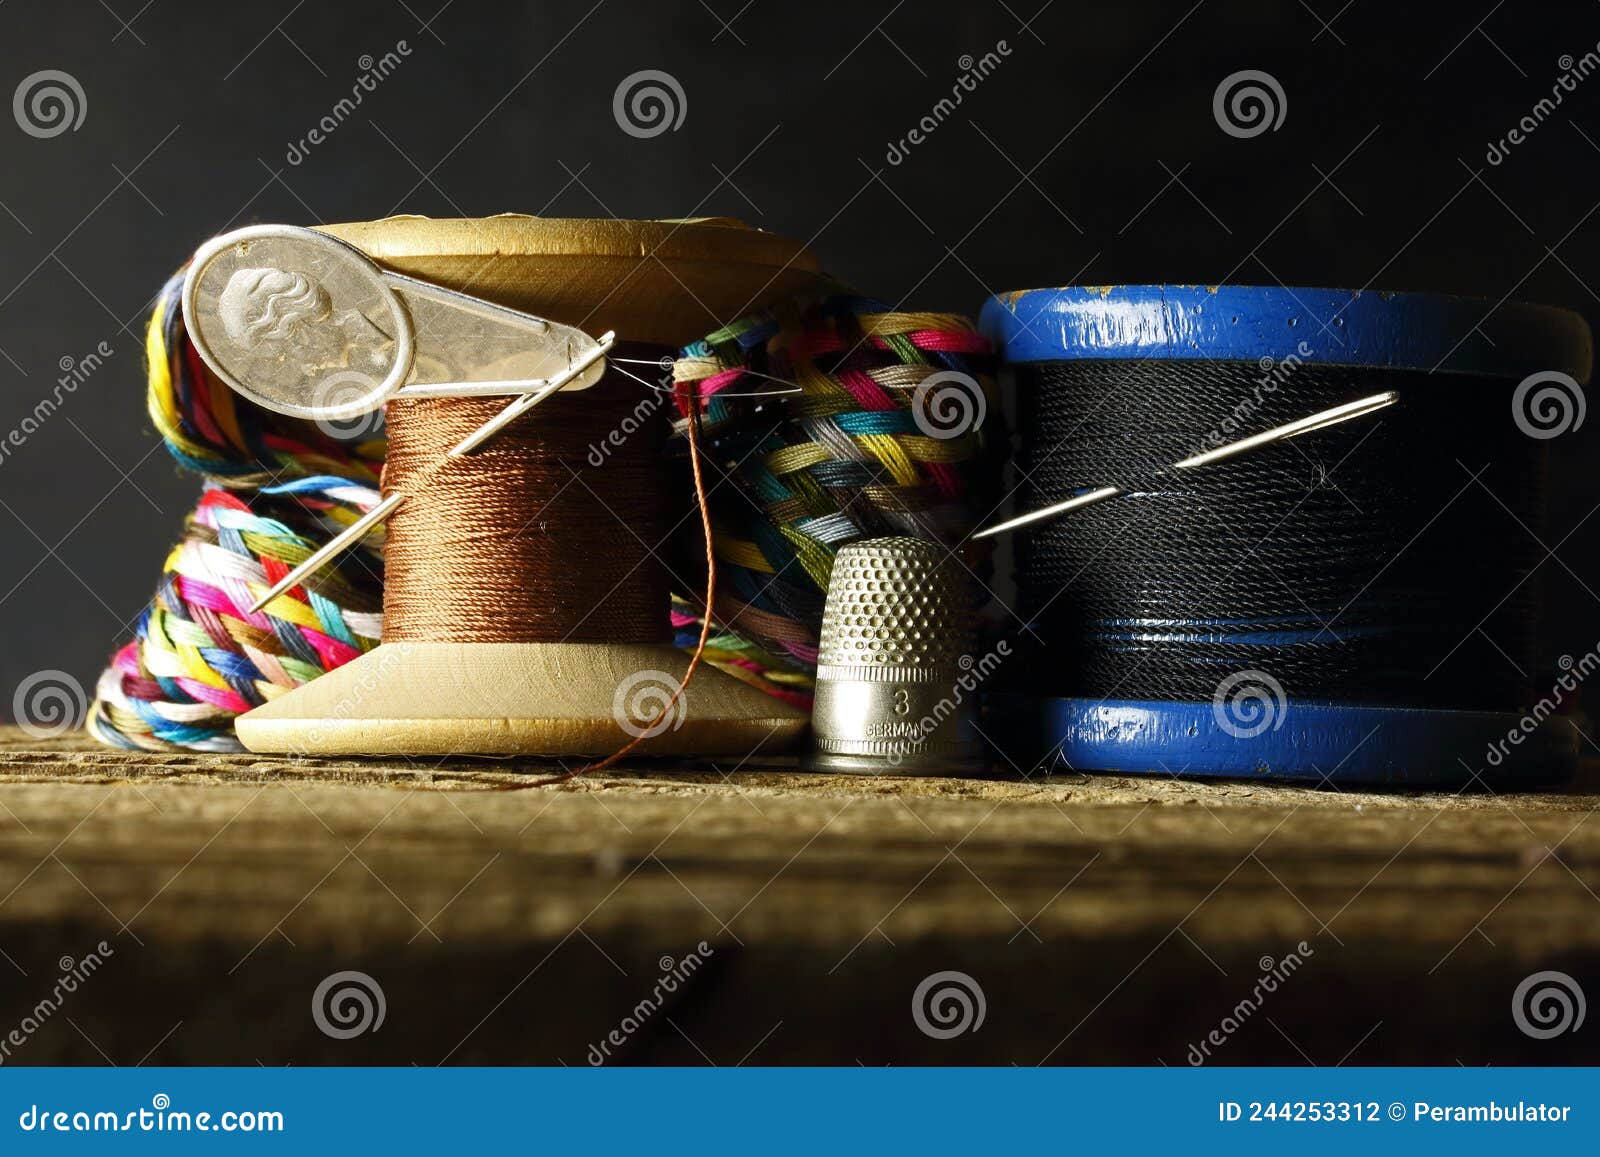 VINTAGE COTTON REELS with THREAD, NEEDLES, THIMBLE, NEELDE THREADER BRIGHT  THREAD BRAID and THREADED NEEDLES Stock Photo - Image of colorful, threading:  244253312